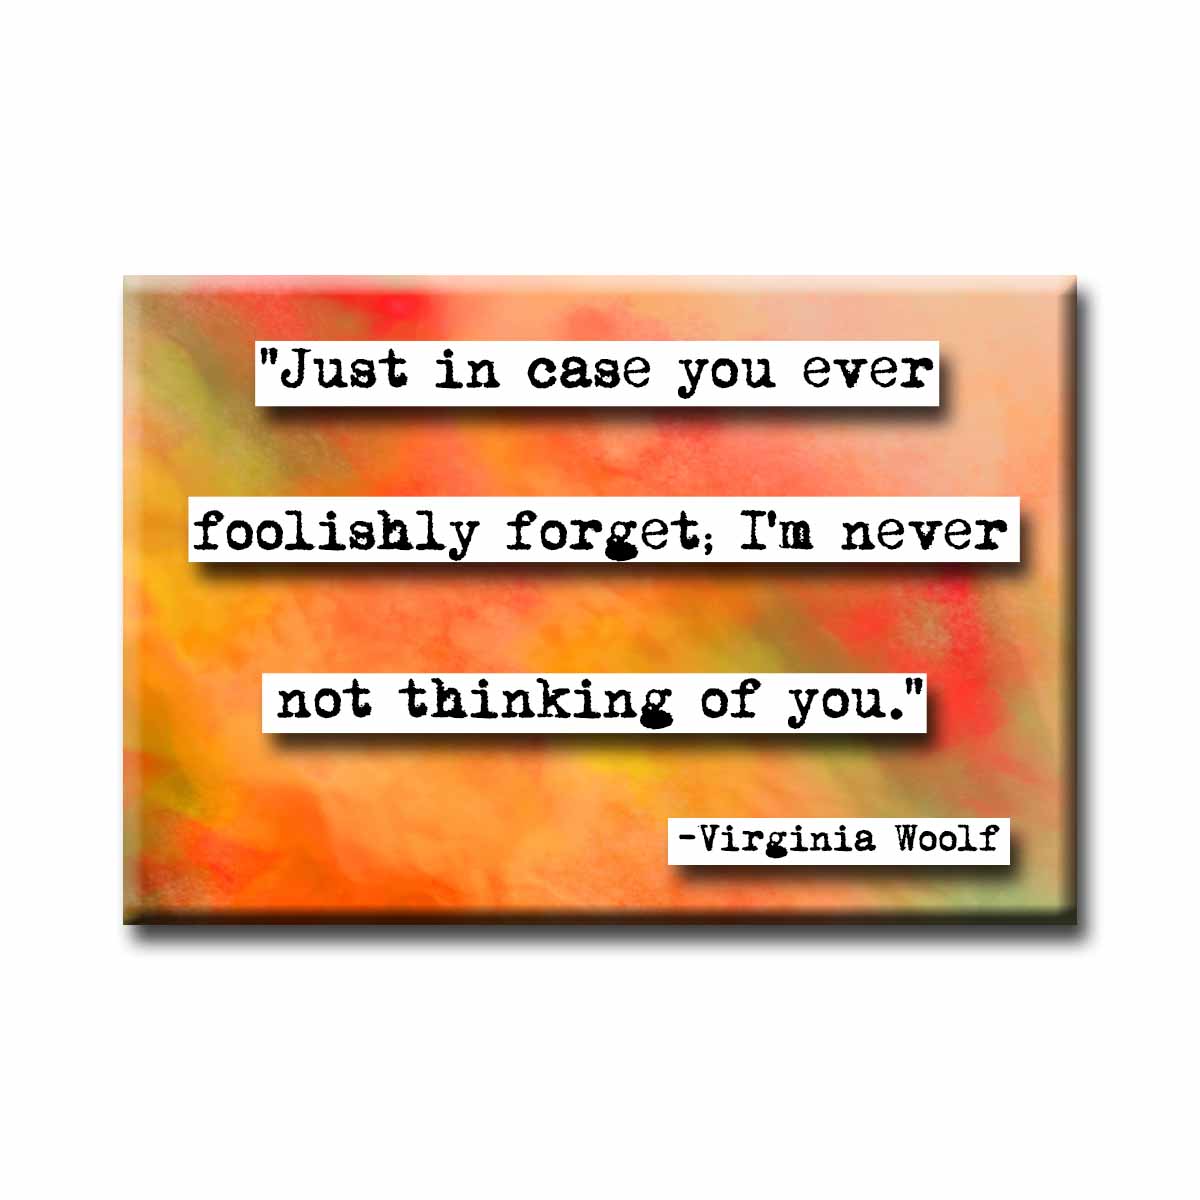 Virginia Woolf Thinking of You Refrigerator Magnet